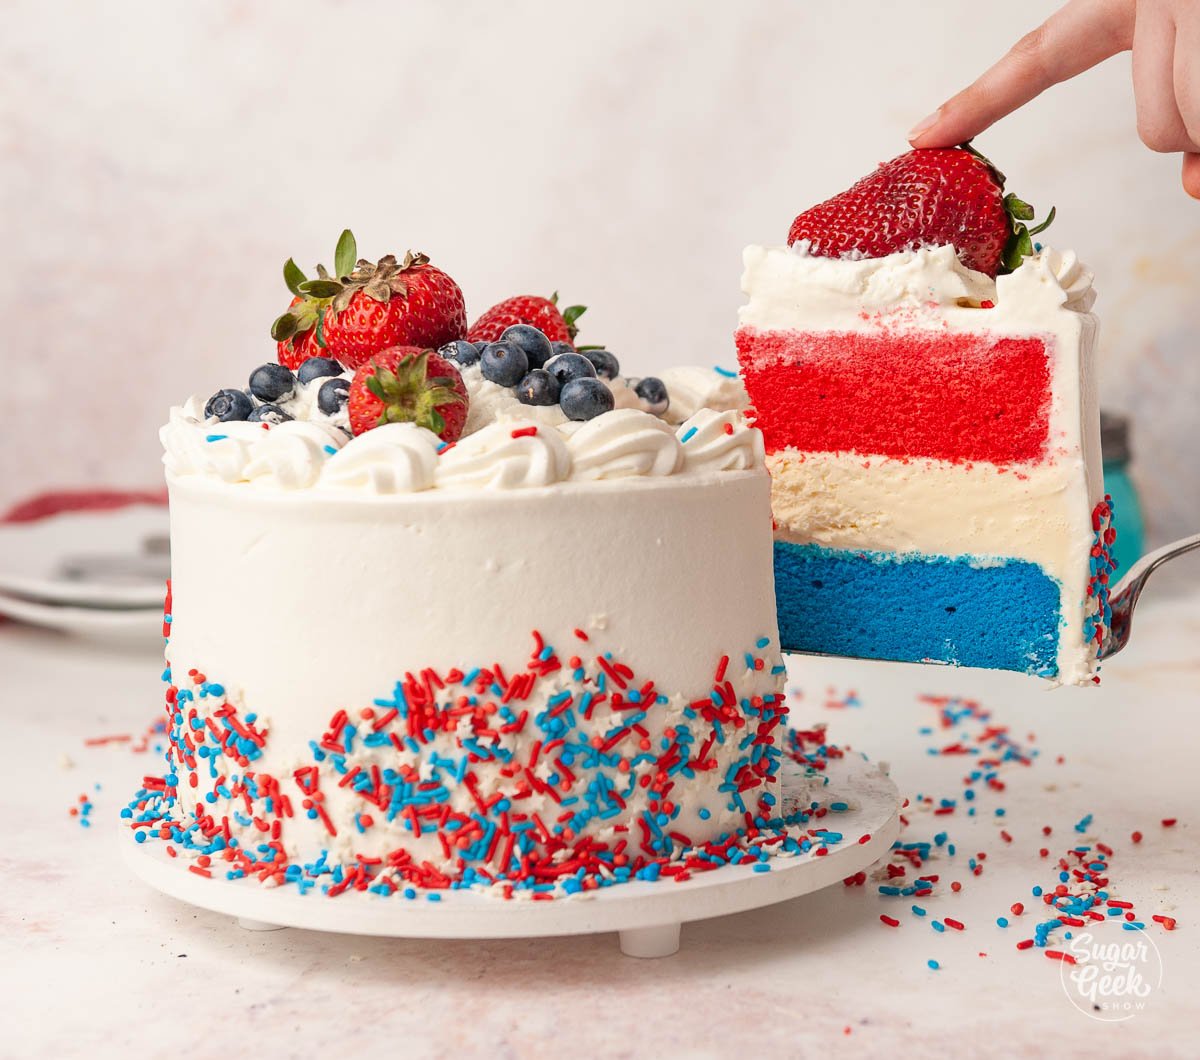 hand pulling a slice of red white and blue ice cream cake out of the main cake